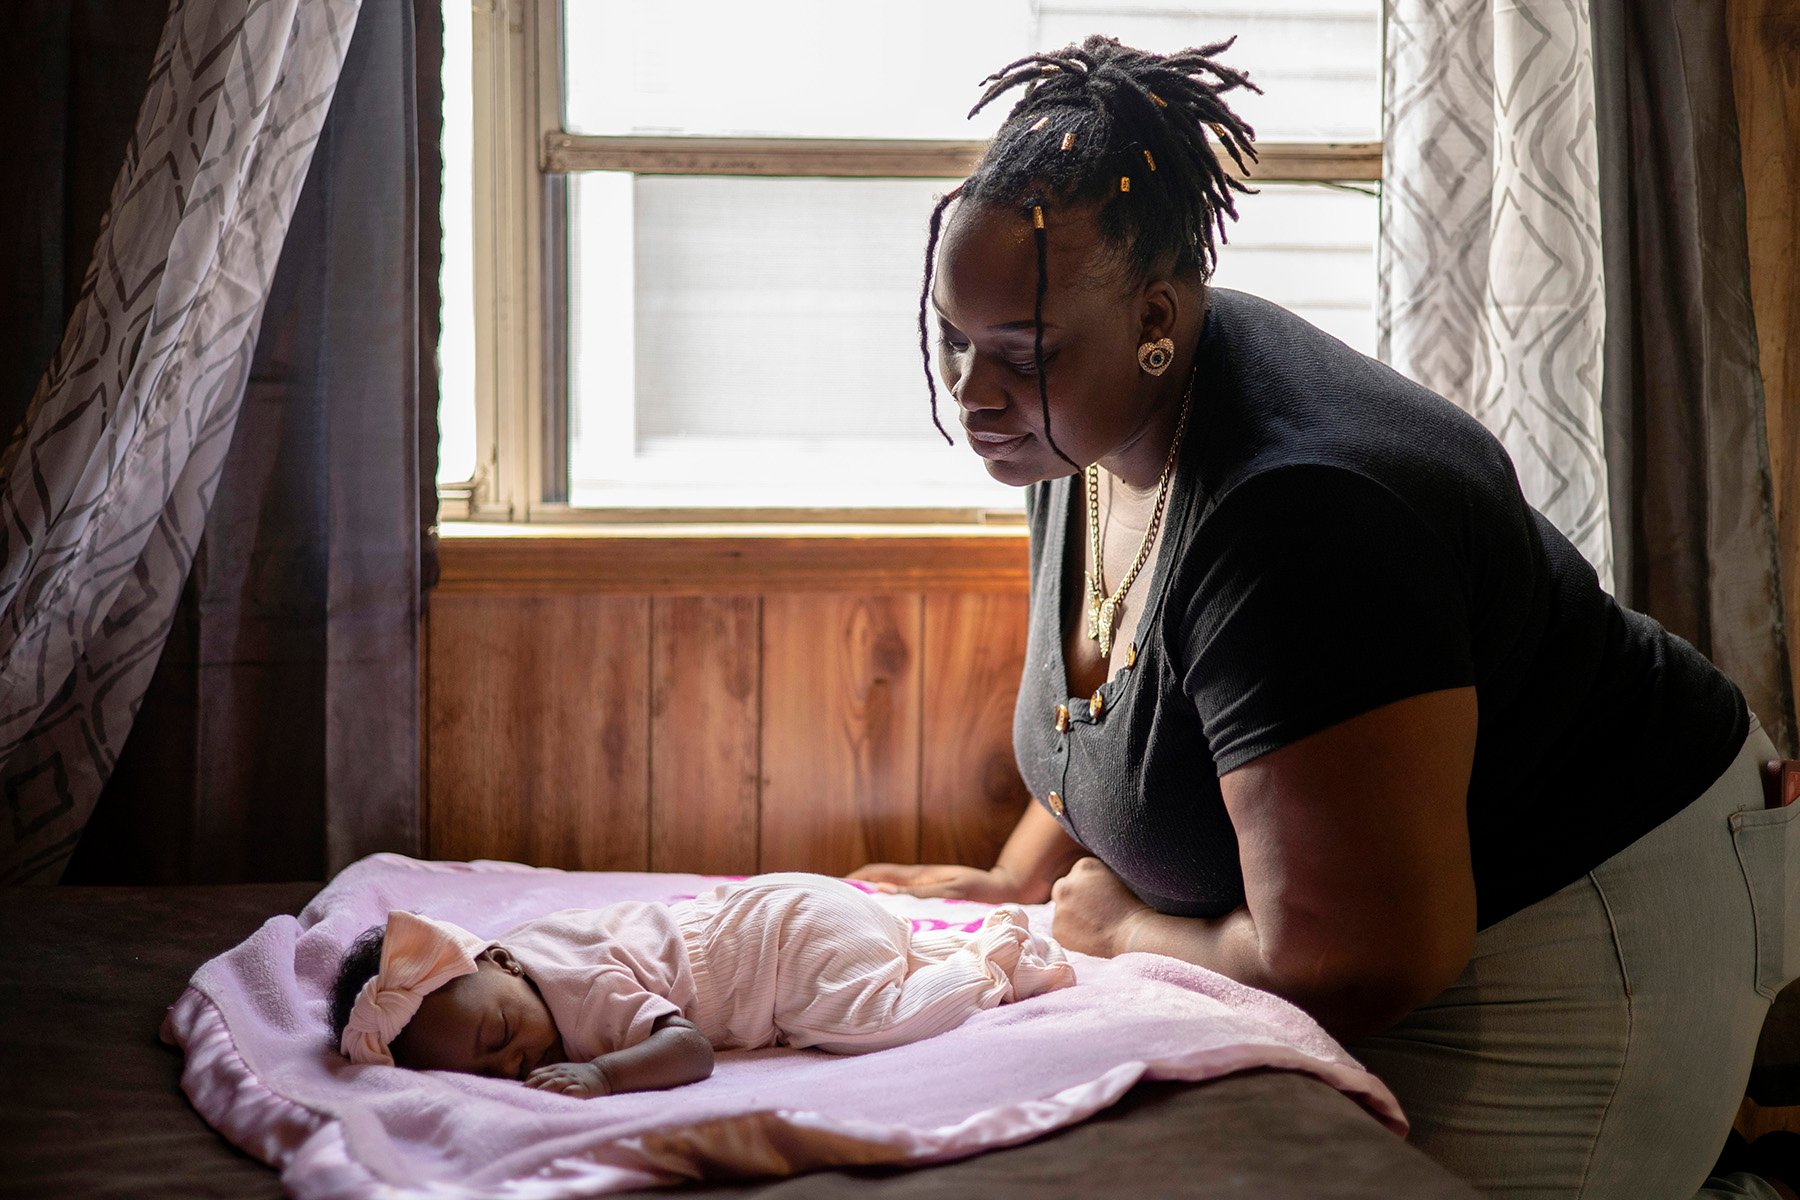 O'Laysha Davis looks down at her 3-month-old daughter, Journee’ Divine Stokes, while she sleeps.